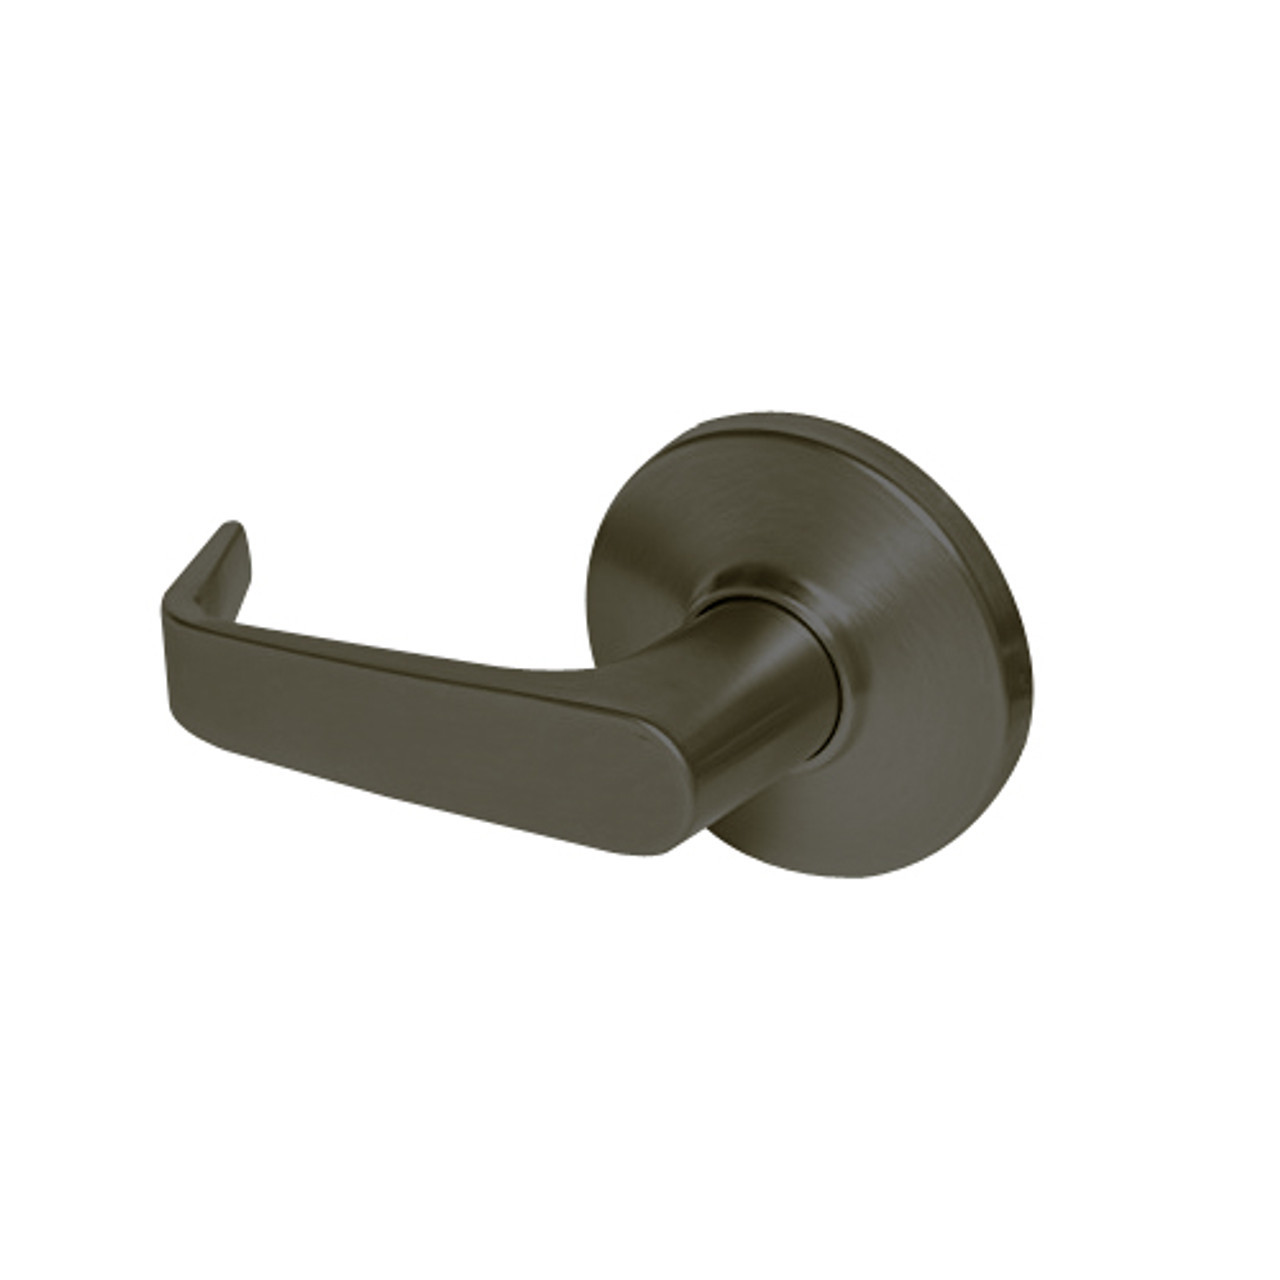 9K30Y15DS3613LM Best 9K Series Exit Heavy Duty Cylindrical Lever Locks with Contour Angle with Return Lever Design in Oil Rubbed Bronze